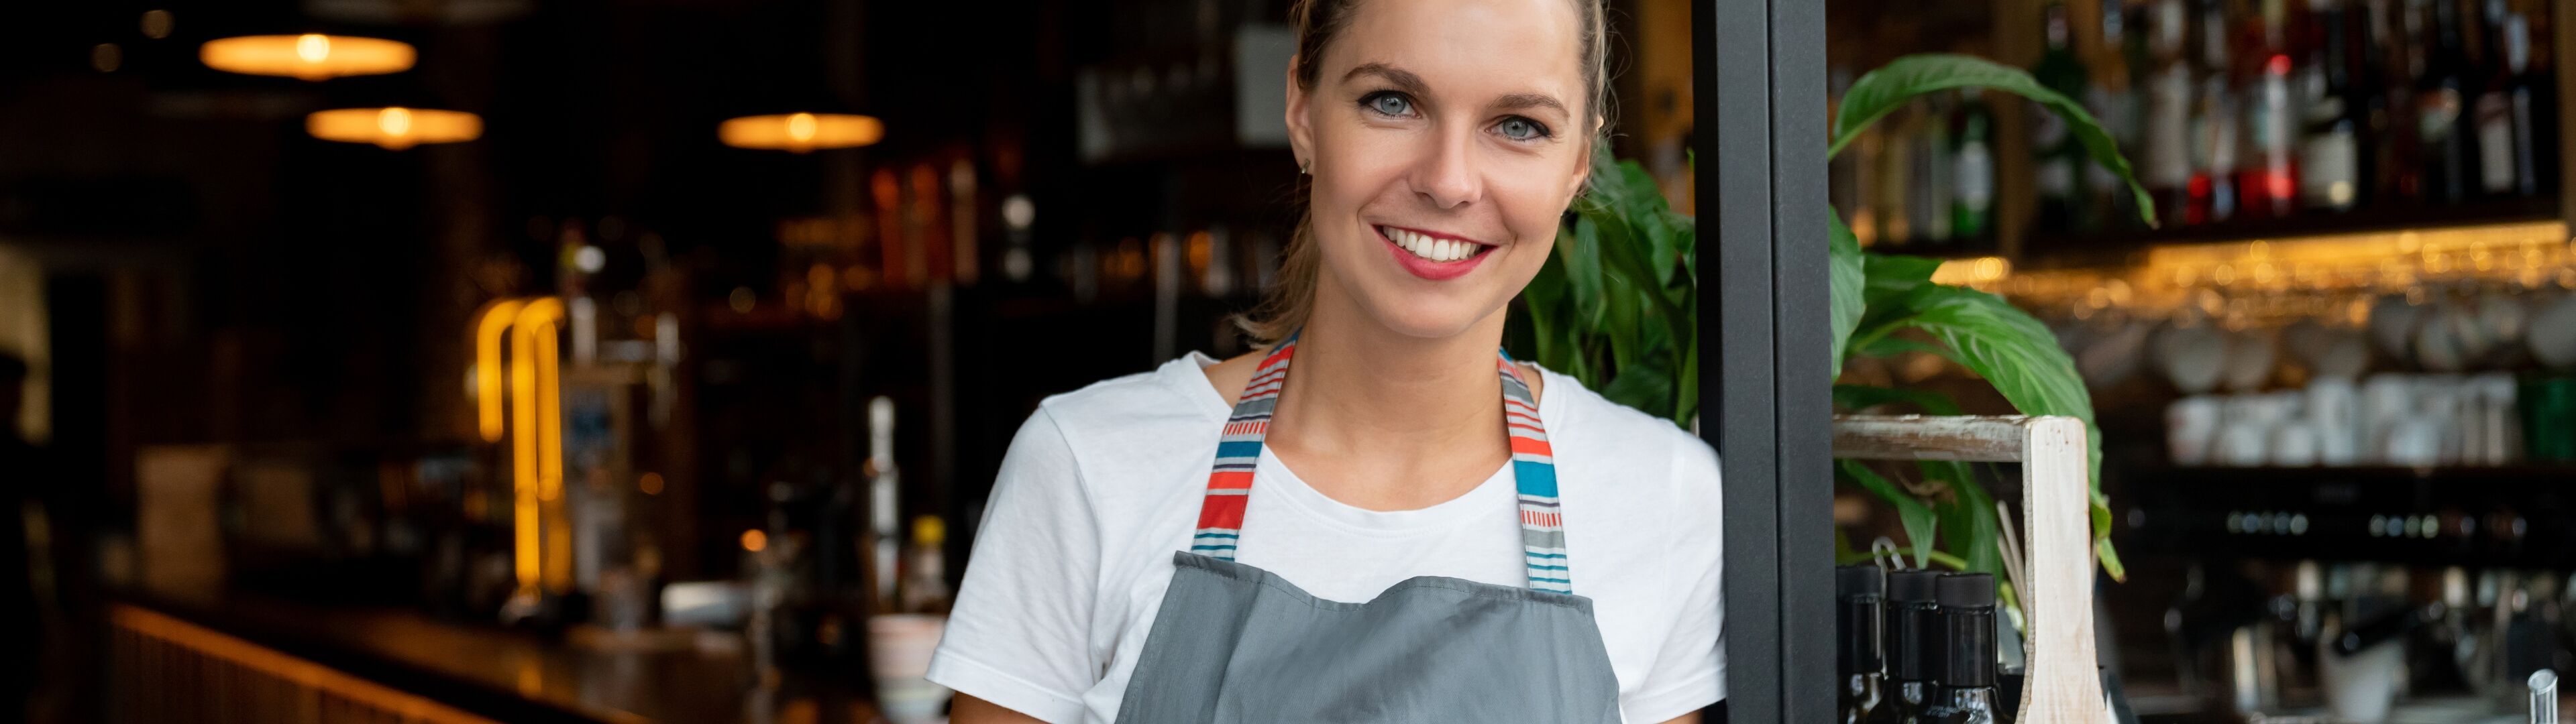 A smiling woman in a casual apron stands at the counter of a cozy restaurant, holding a digital tablet.